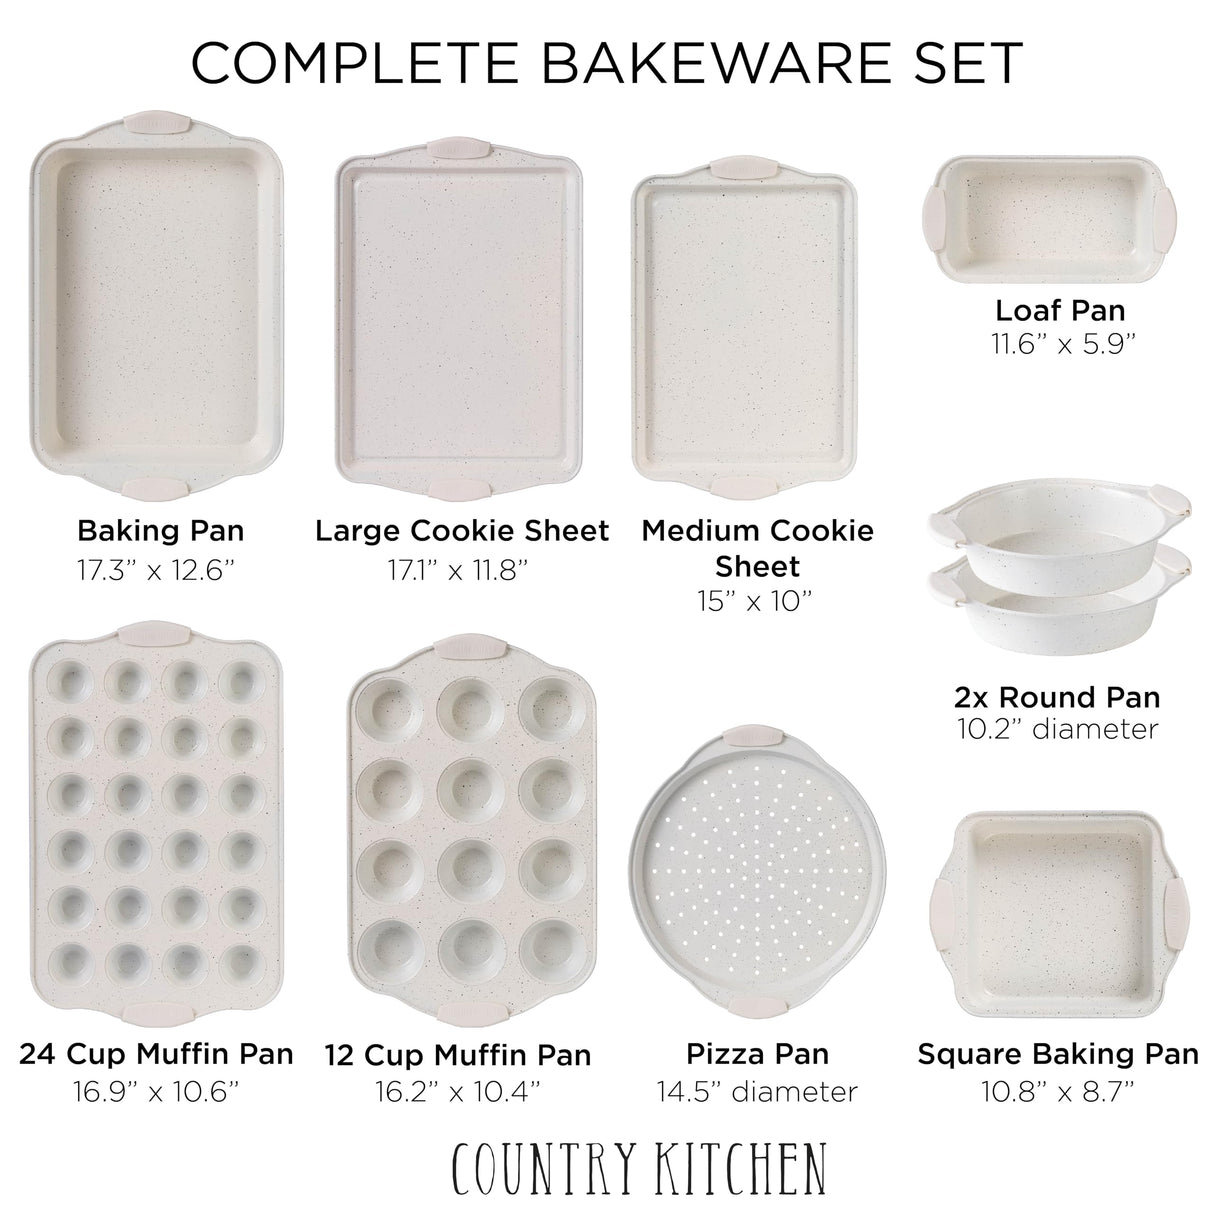 Country Kitchen 10-Piece Nonstick Stackable Bakeware Set - PFOA, PFOS, PTFE Free Baking Tray Set w/Non-Stick Coating, 450°F Oven Safe, Round Cake, Loaf, Muffin, Wide/Square Pans, Cookie Sheet (Cream)